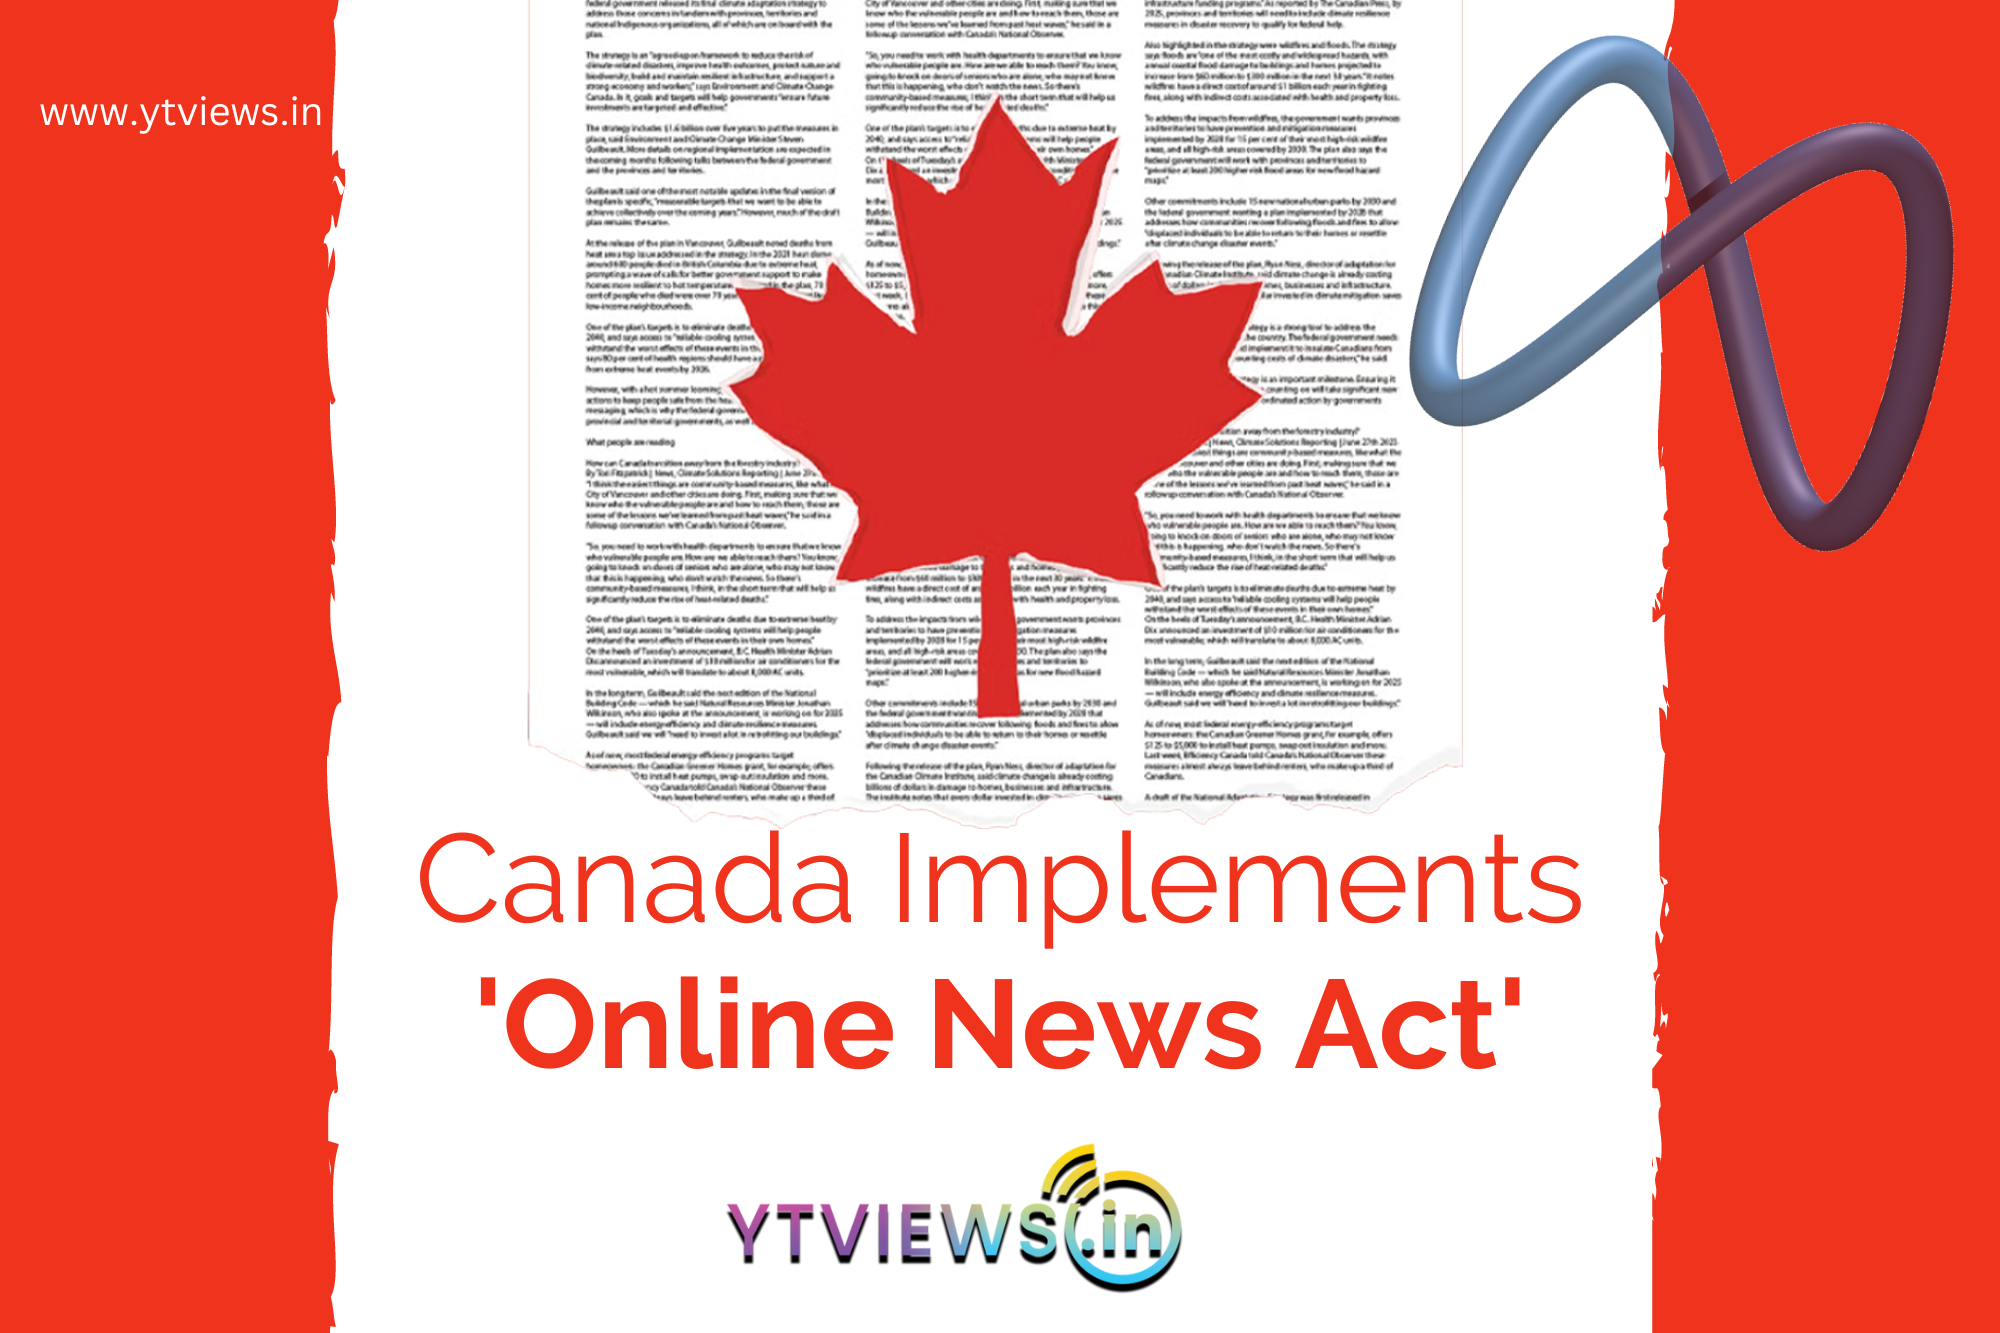 Canada implements ‘Online News Act’ resulting in Meta’s news content ban